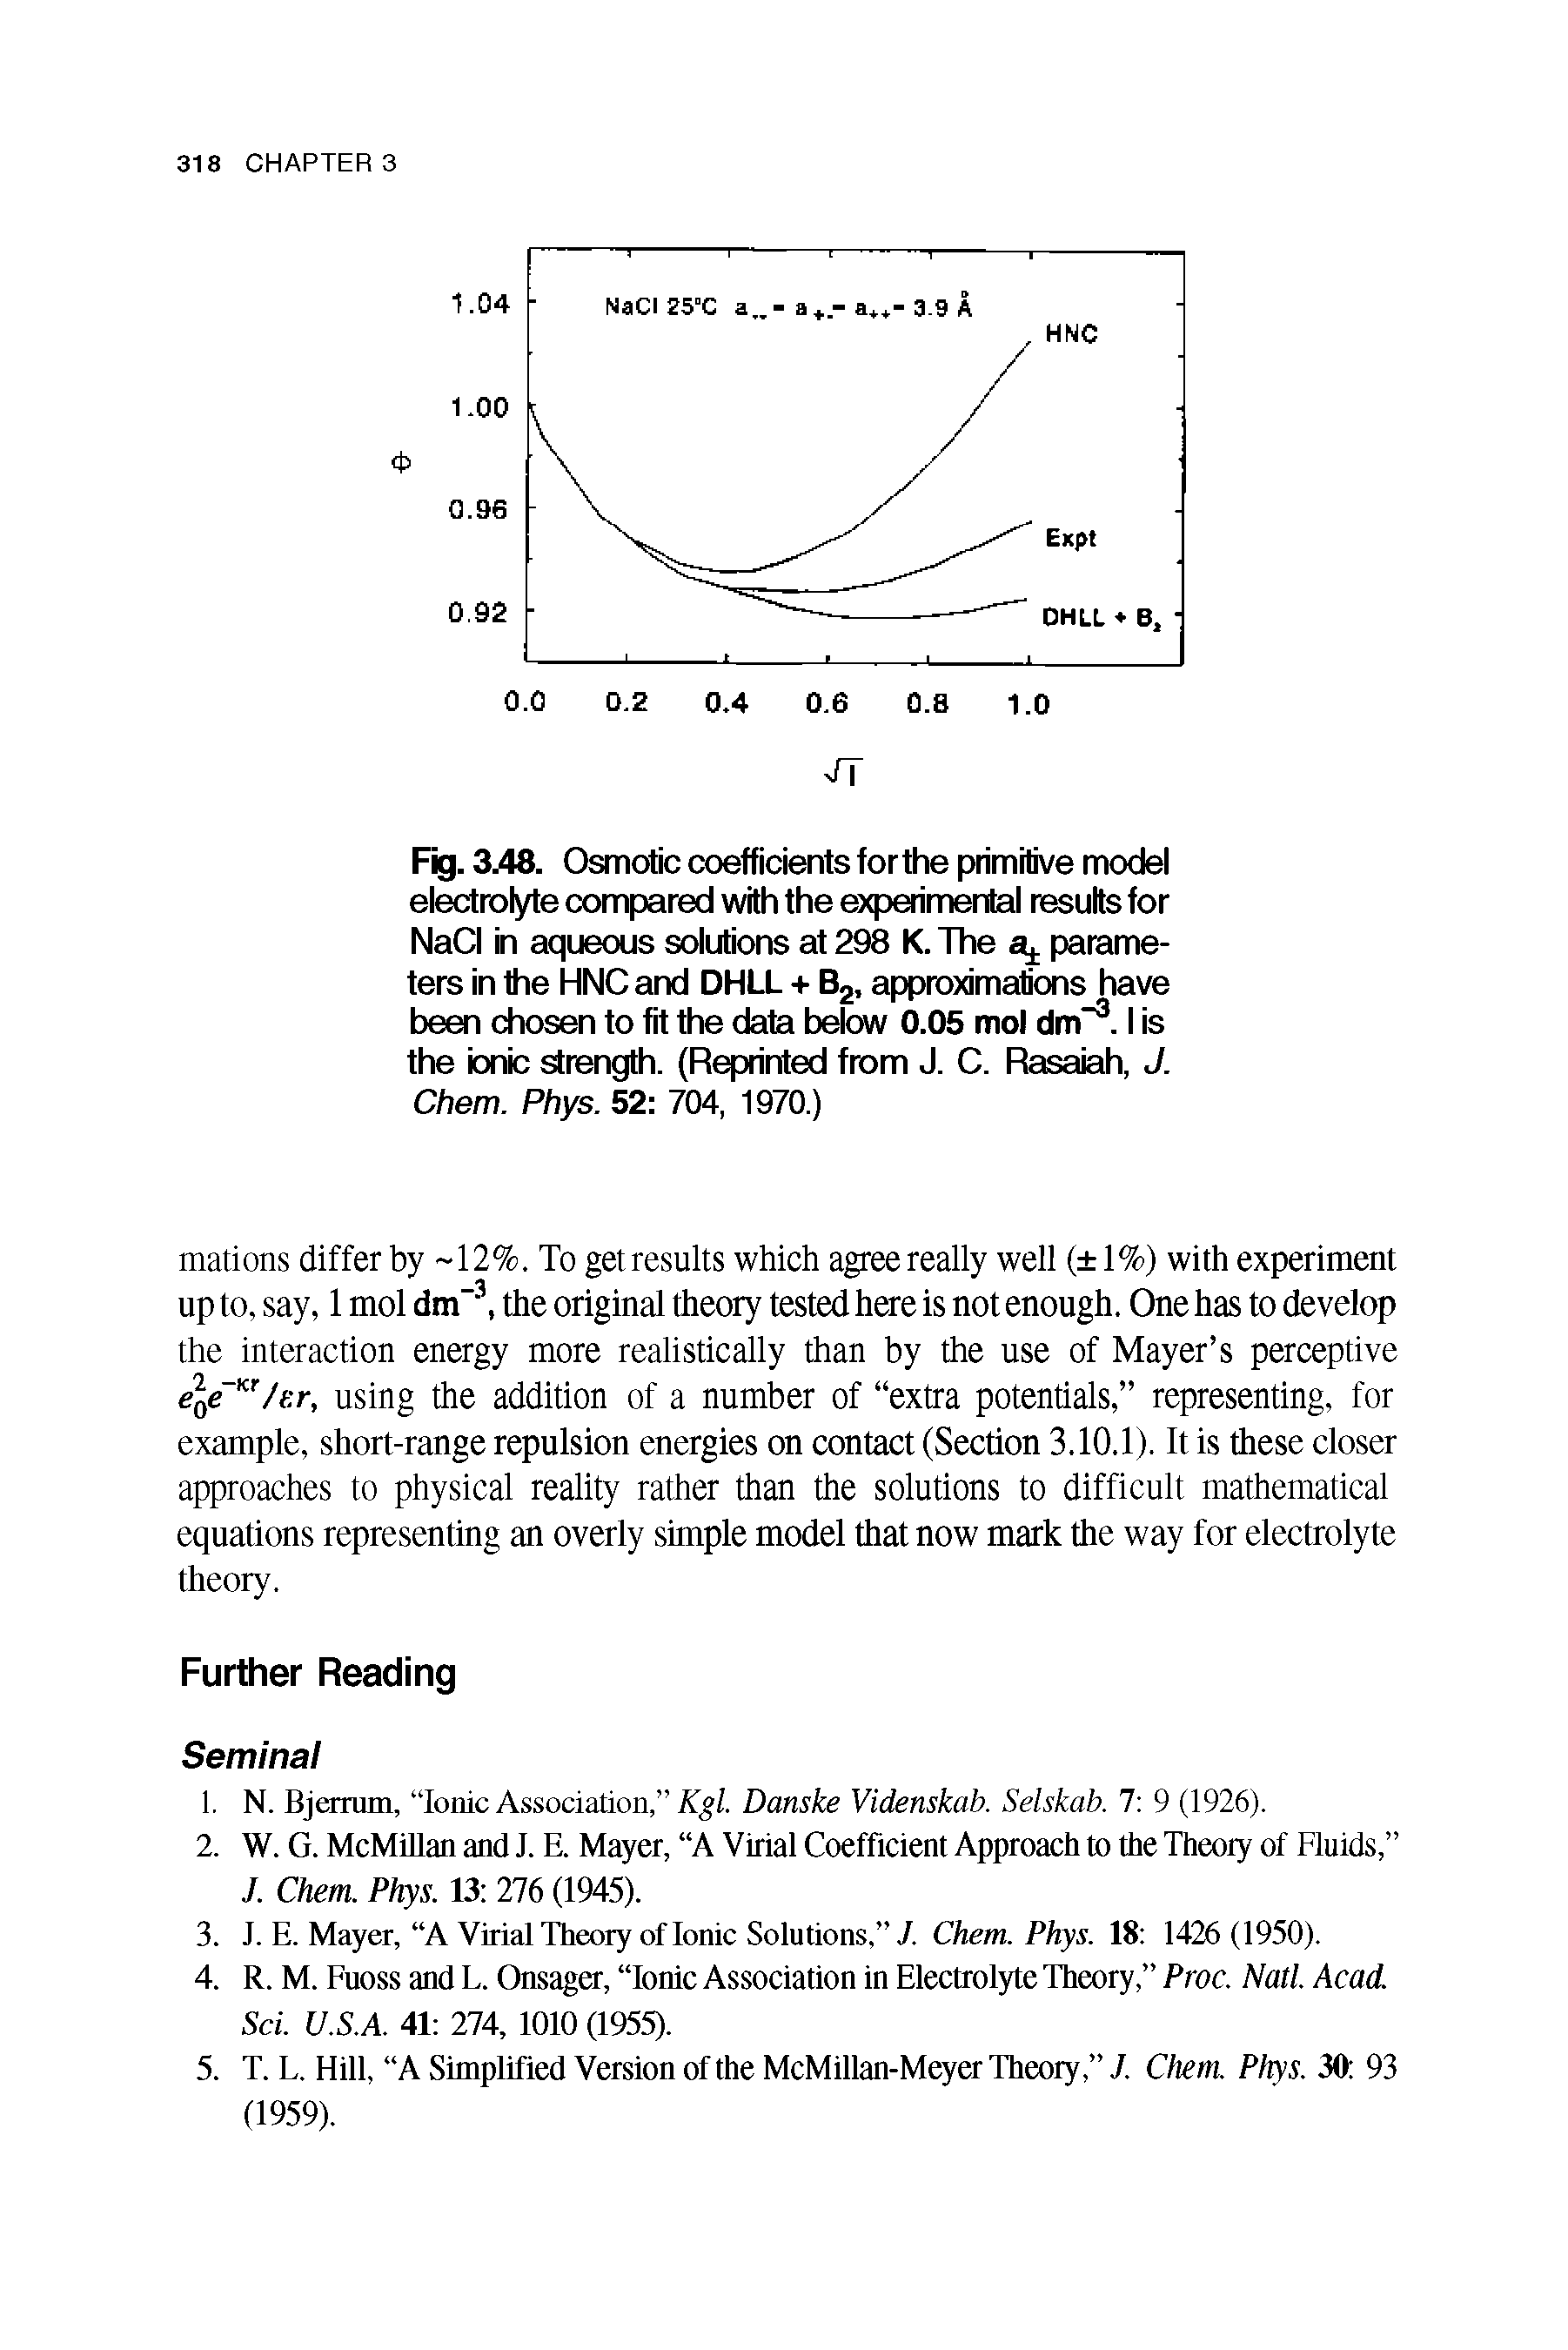 Fig. 348. Osmotic coefficients for the primitive model electrolyte compared with the experimental results for NaCI in aqueous solutions at 298 K. The a. parameters in the HNC and DHLL + Bg, approximations have been chosen to fit the data below 0.05 mol dm . I is the ionic strength. (Reprinted from J. C. Rasaiah, J. Chem. Phys. 52 704, 1970.)...